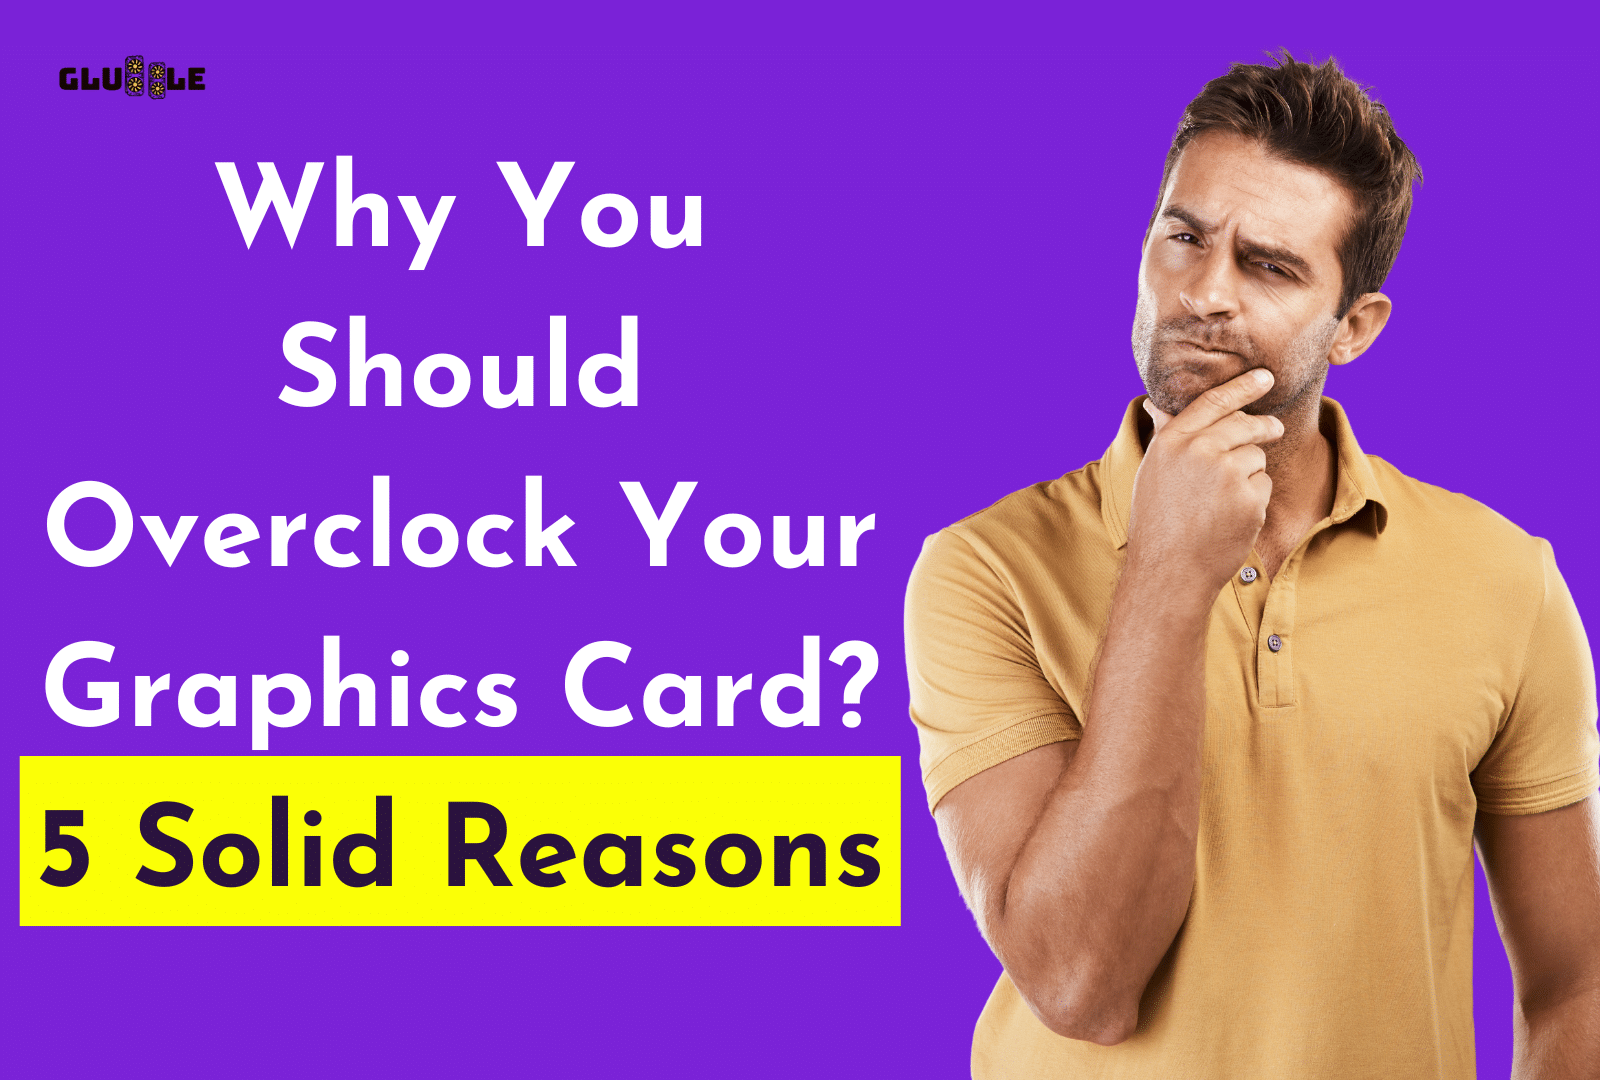 C:\Users\Mohsin\Downloads\Why You Should Overclock Your Graphics Card 5 Solid Reasons.png